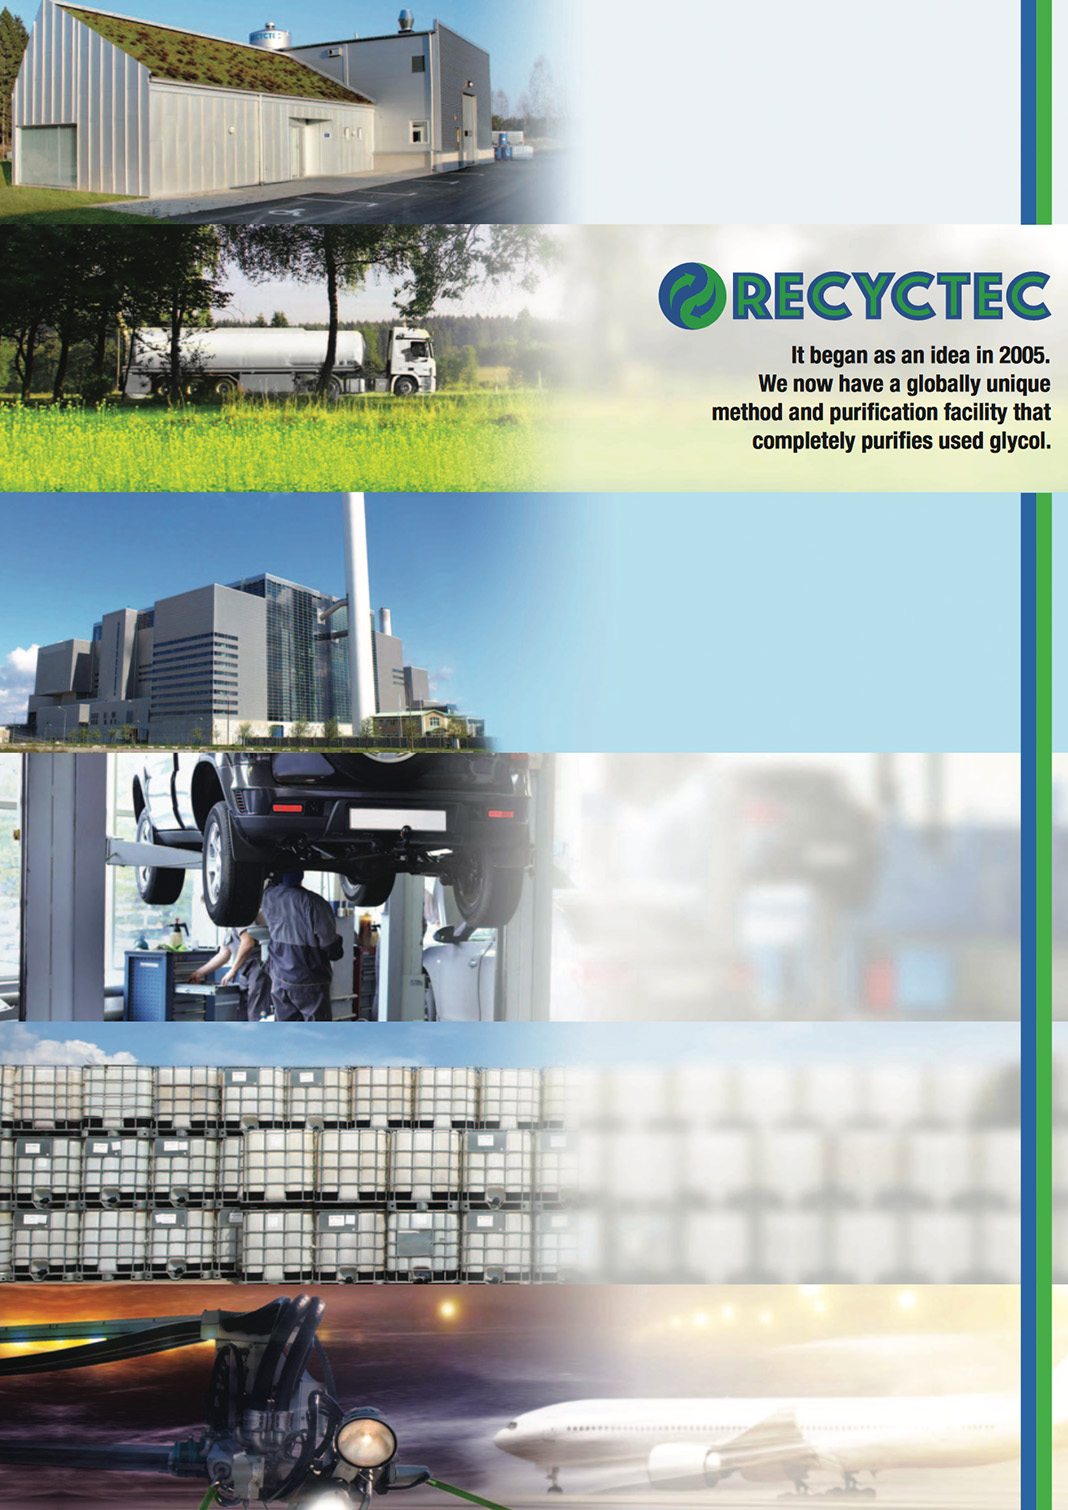 purification of used glycol|Recyctec's purification of used glycol|purification of used glycol